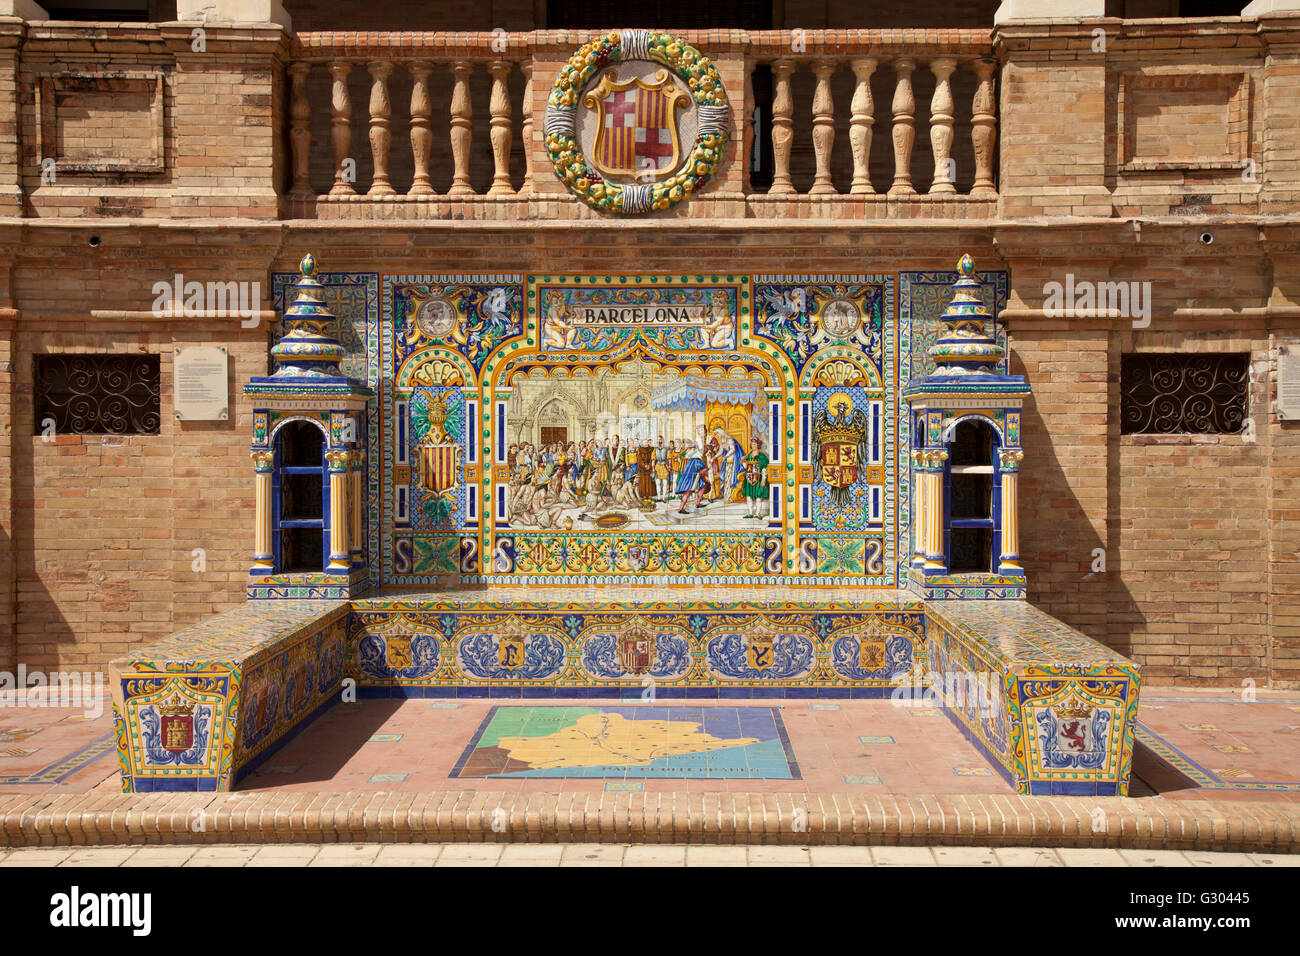 Tiled image and map of Barcelona in the Plaza de Espana, Seville, Andalusia, Spain, Europe Stock Photo